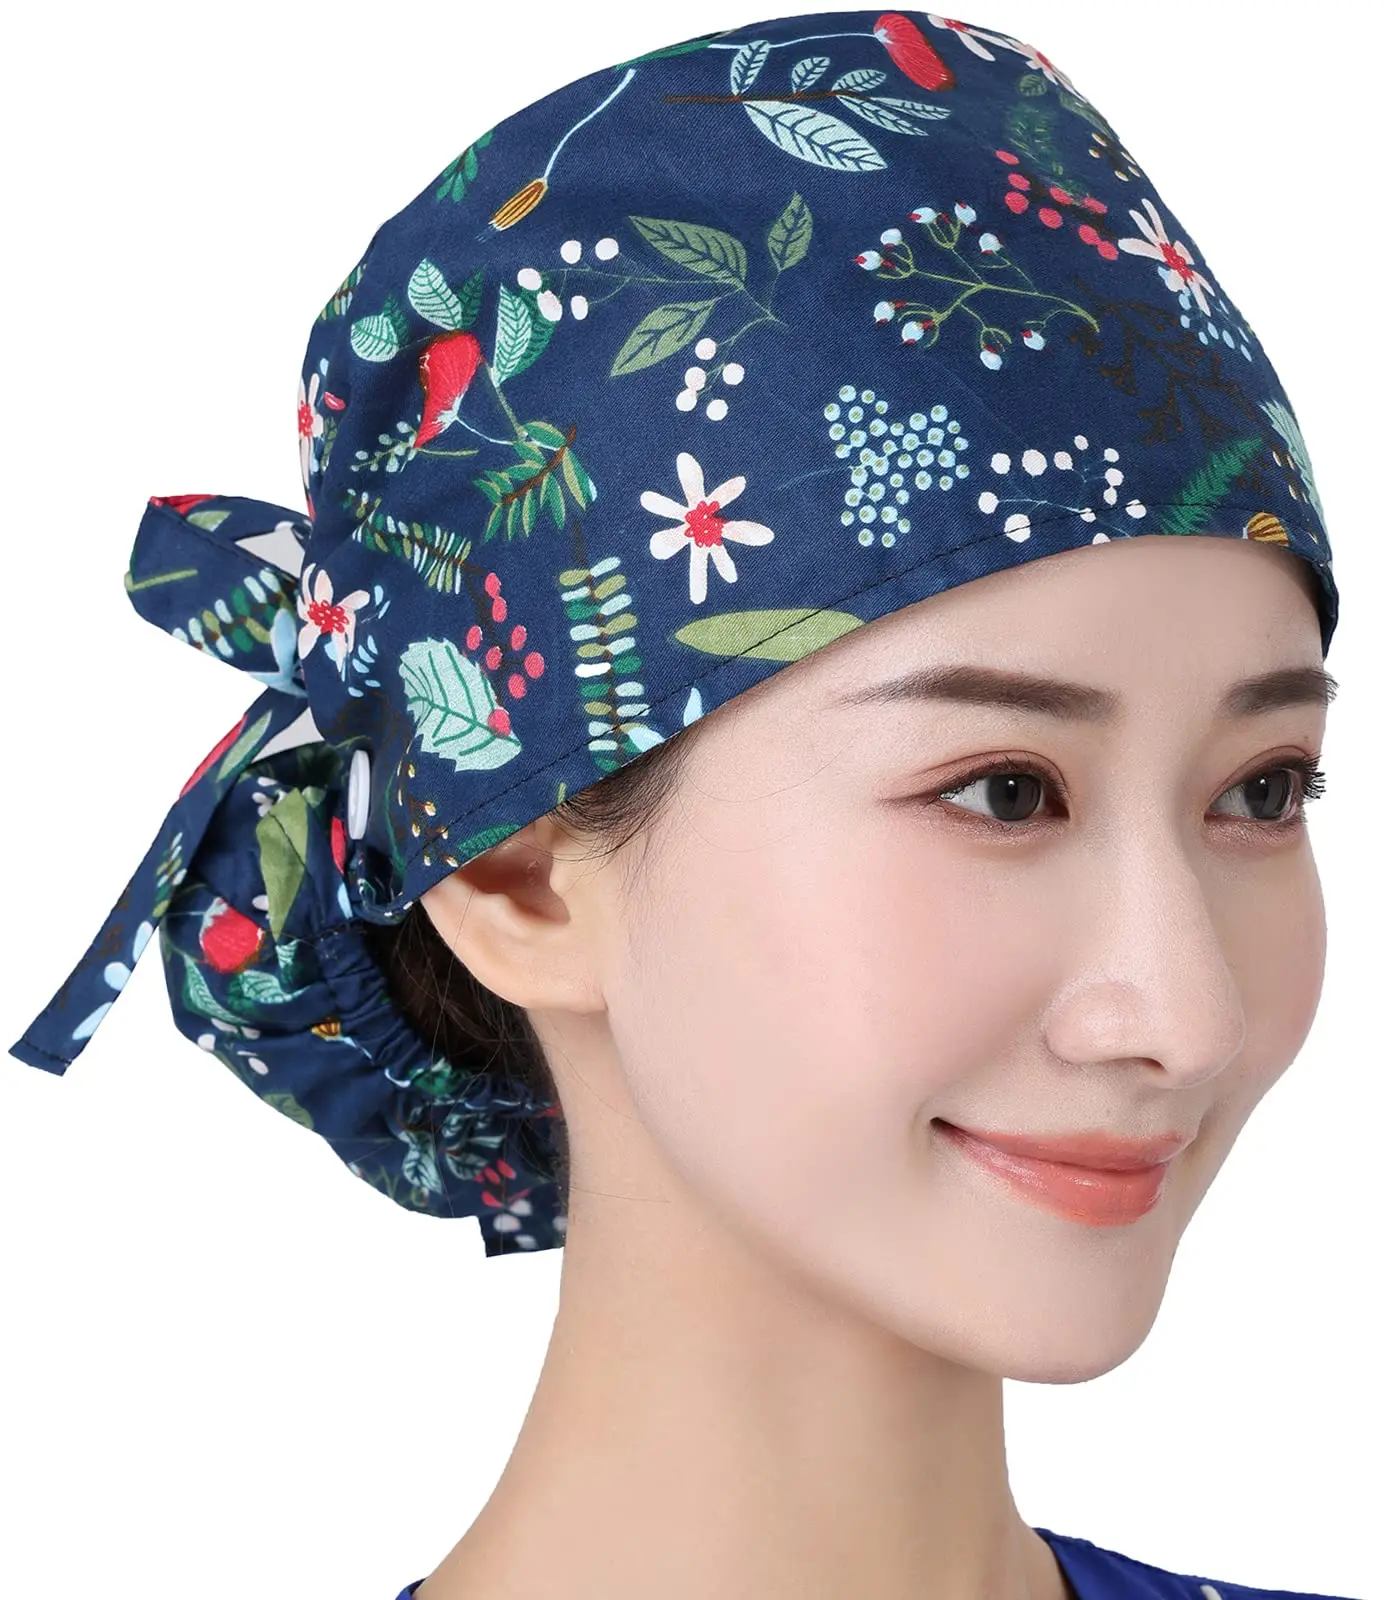 Long Hair Scrub Women Working Hats Surgical Bouffant Caps Tie Back Nurse Hat With Buttons Adjustable Ponytail Holder